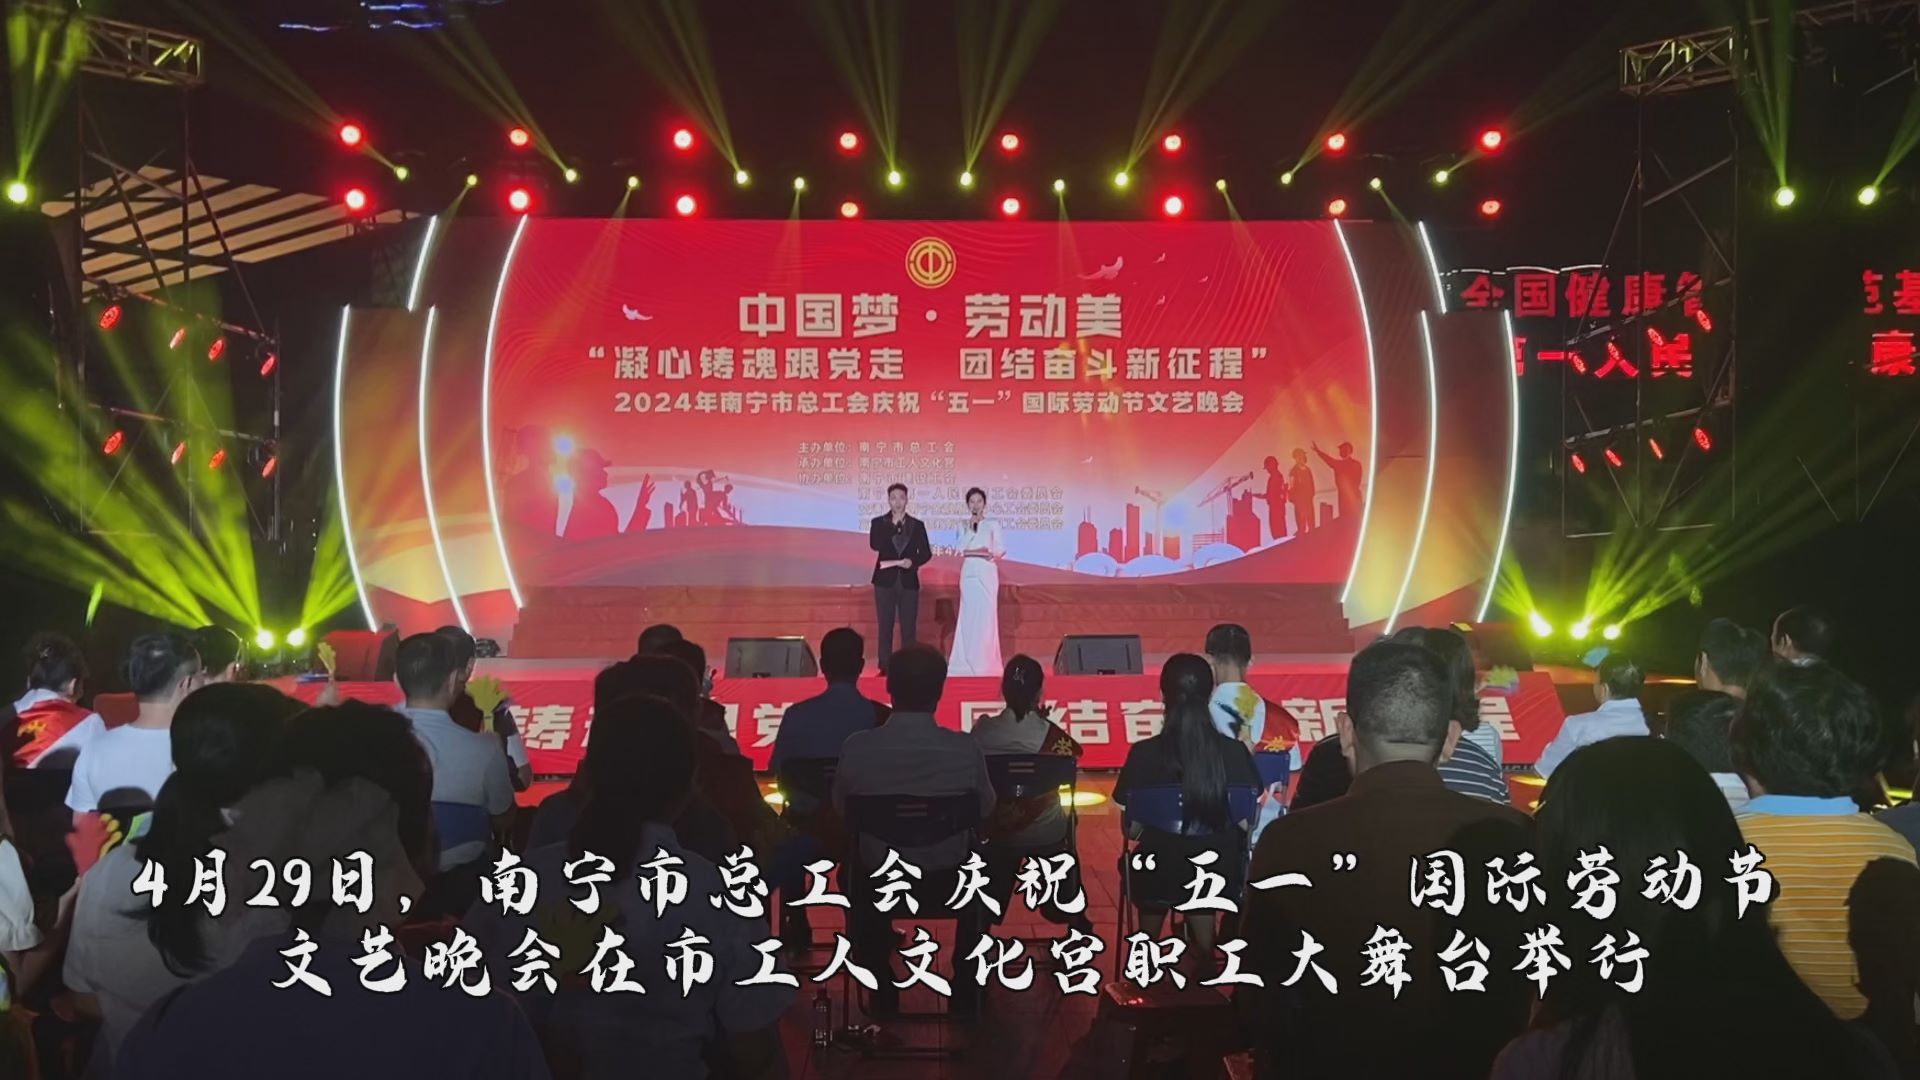  Nanning Federation of Trade Unions held a gala to celebrate the May Day International Labor Day